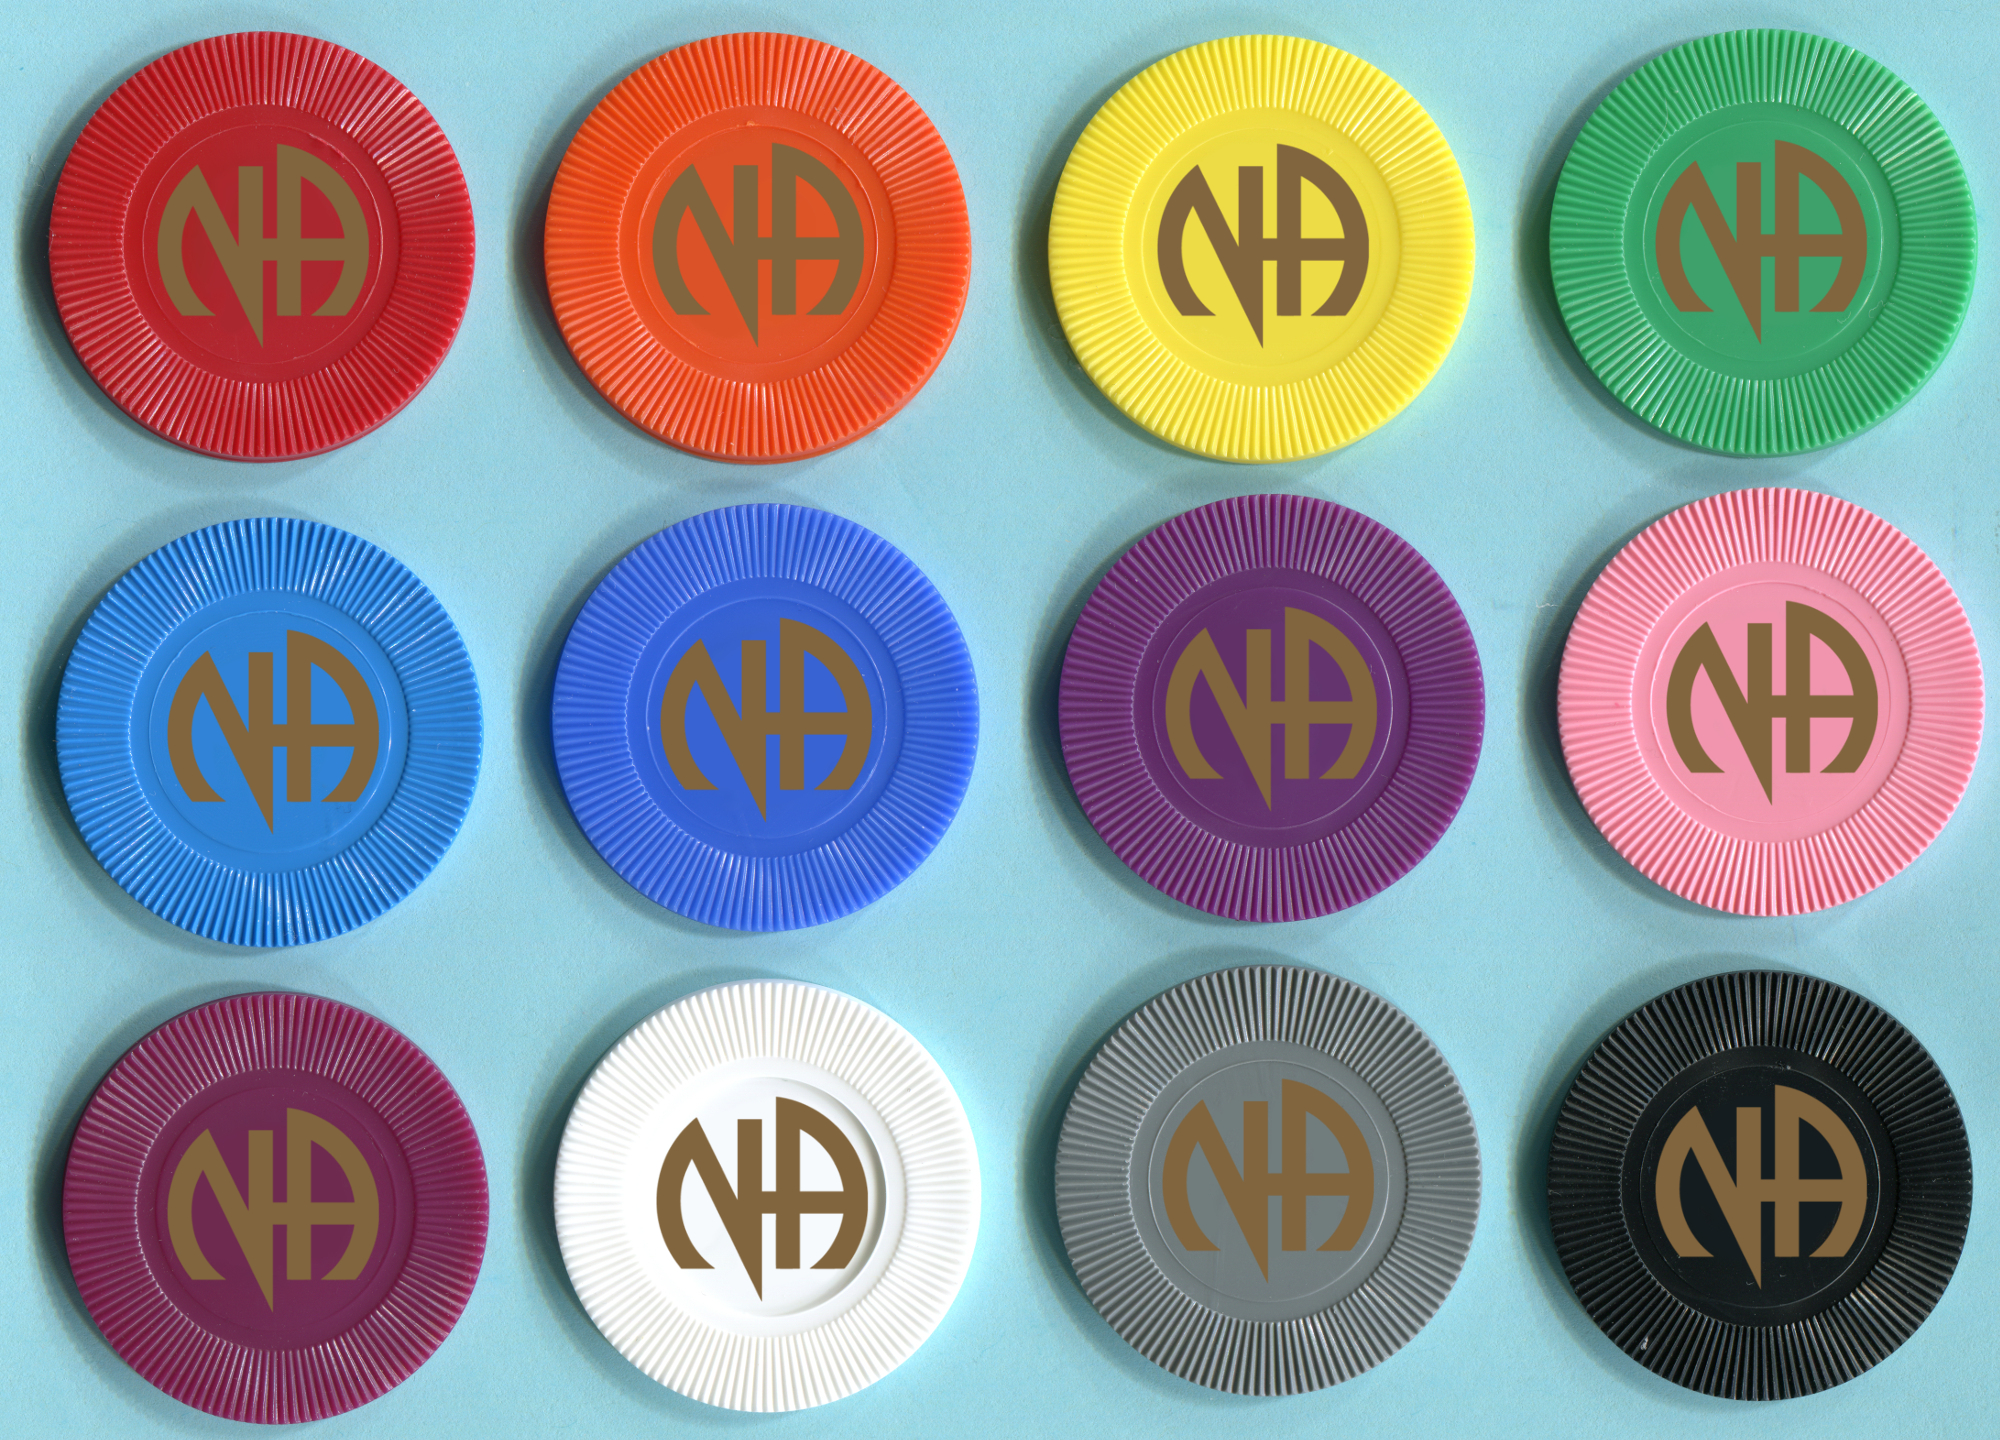 1000+ images about Narcotics Anonymous on Pinterest 